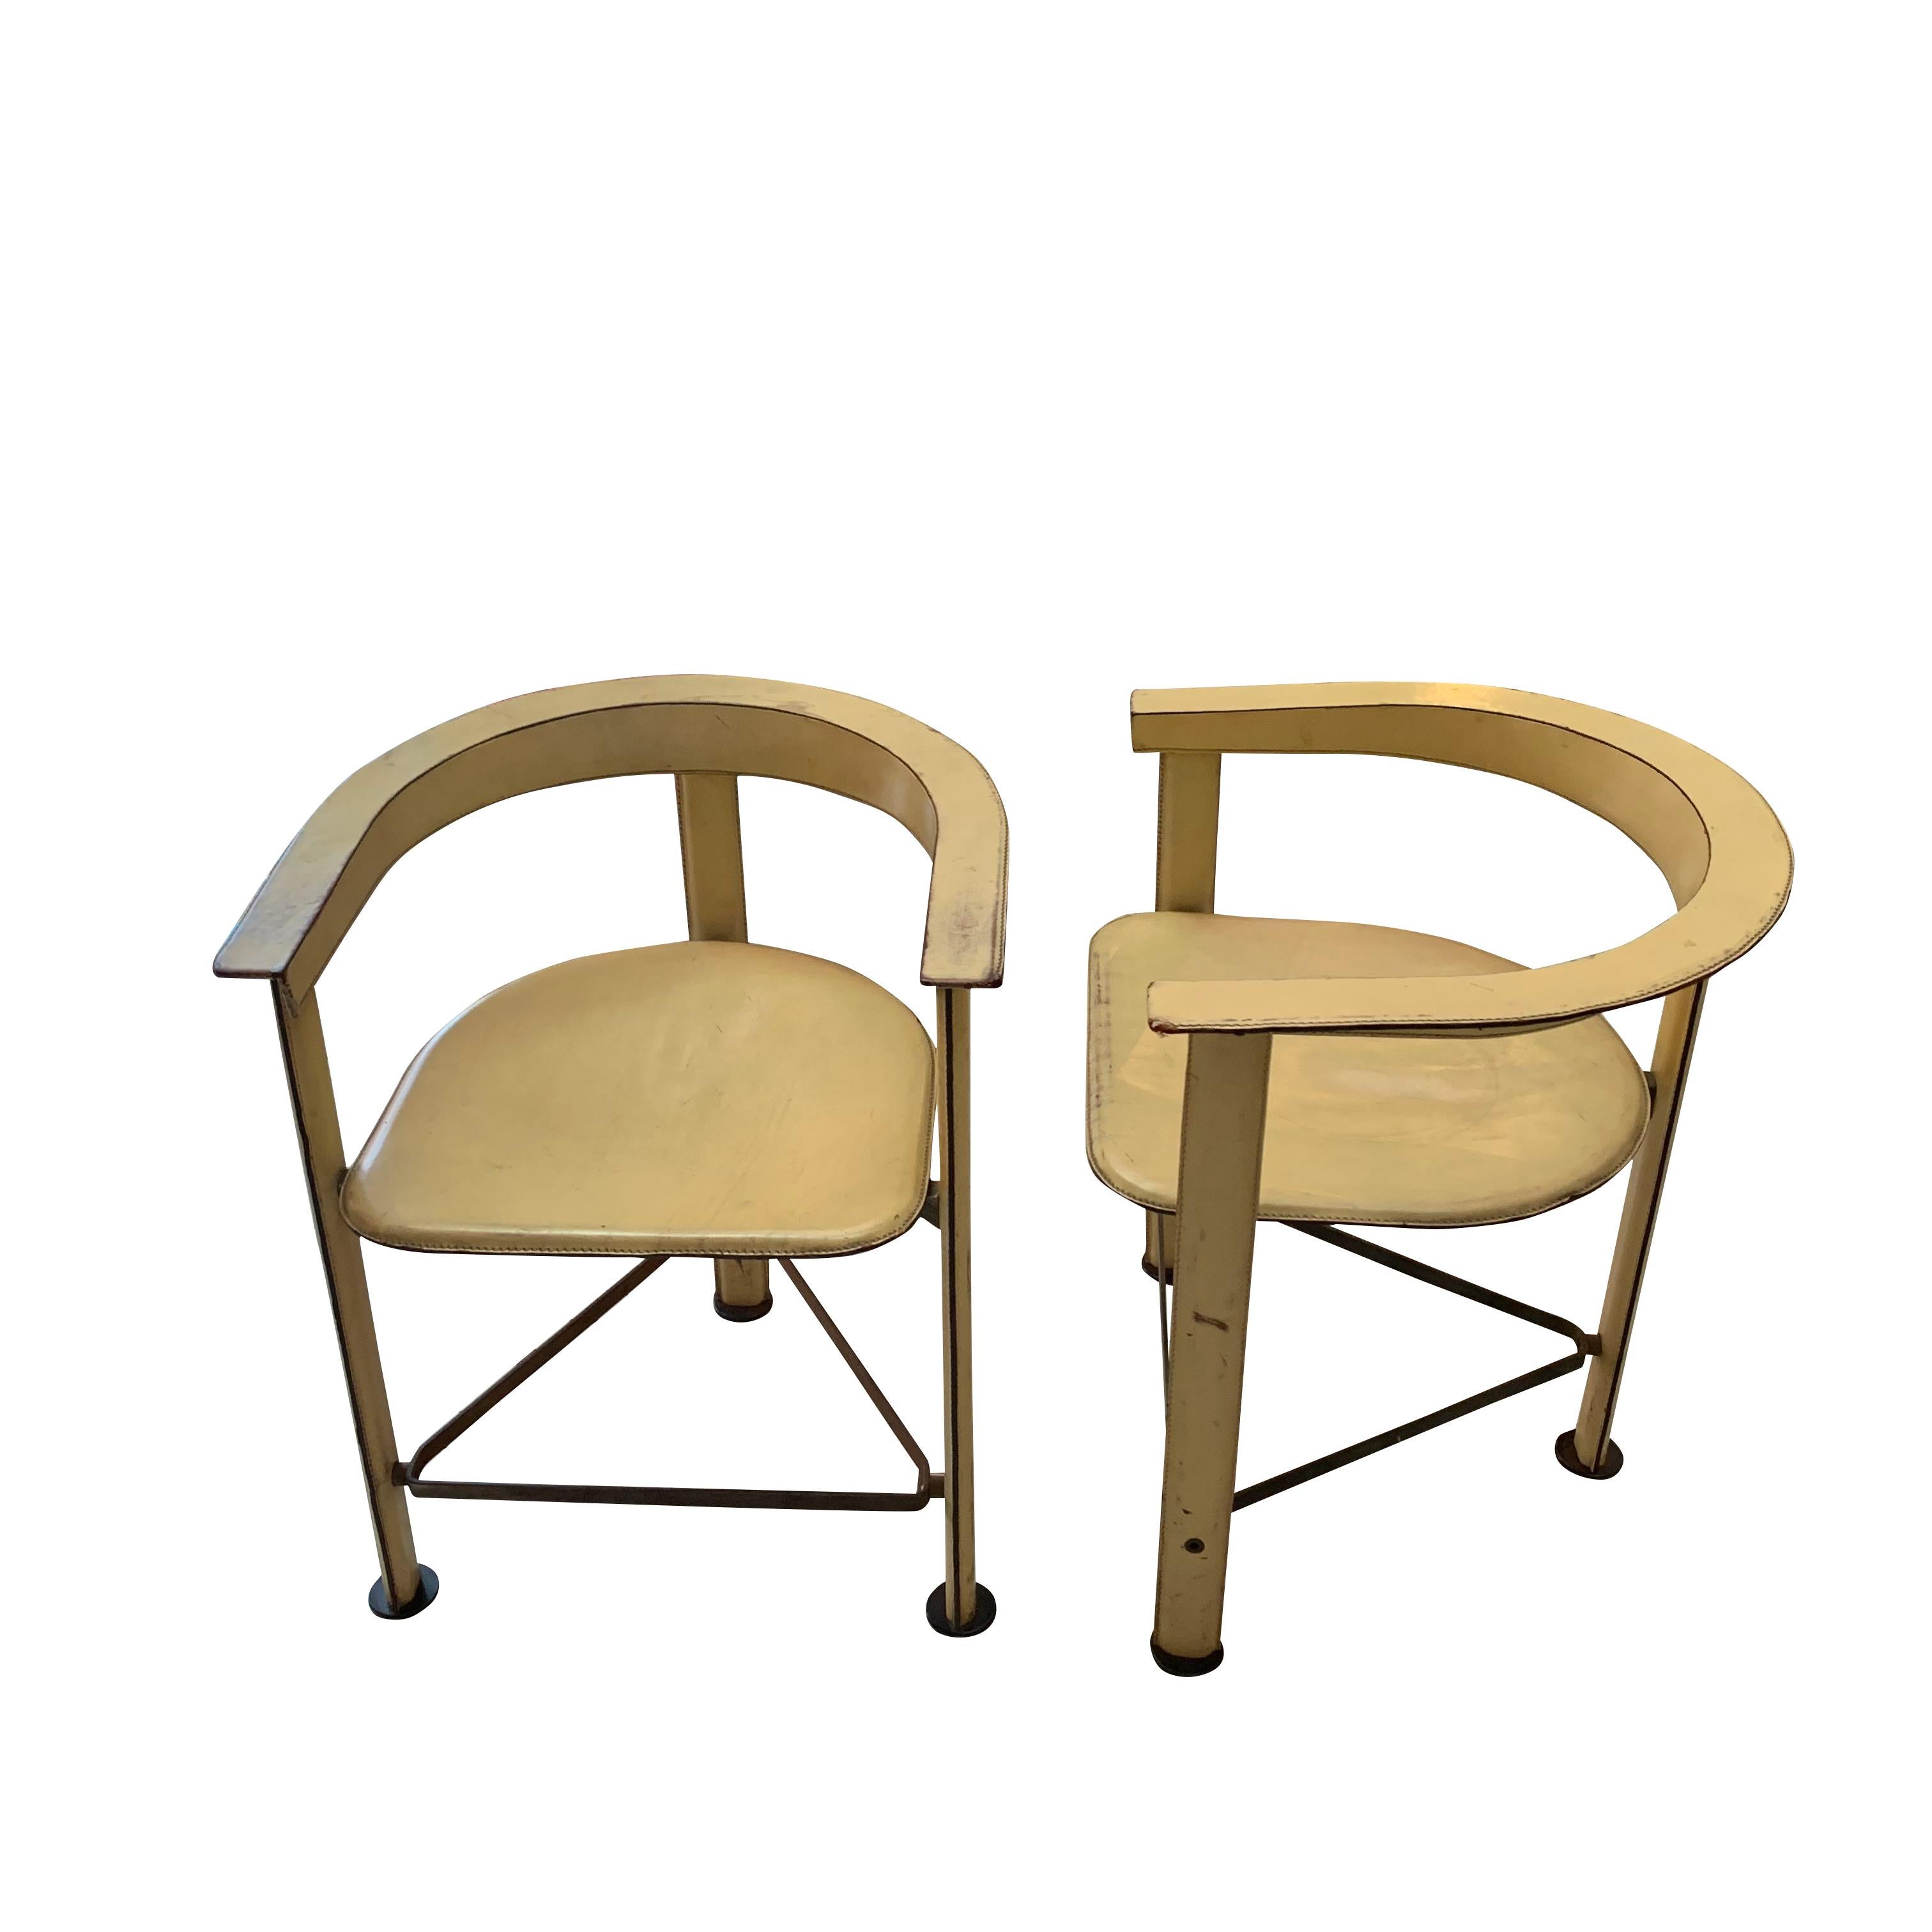 1970s Moroccan pair vellum colored leather chairs
Curved back seat
Aged brass footings.
  